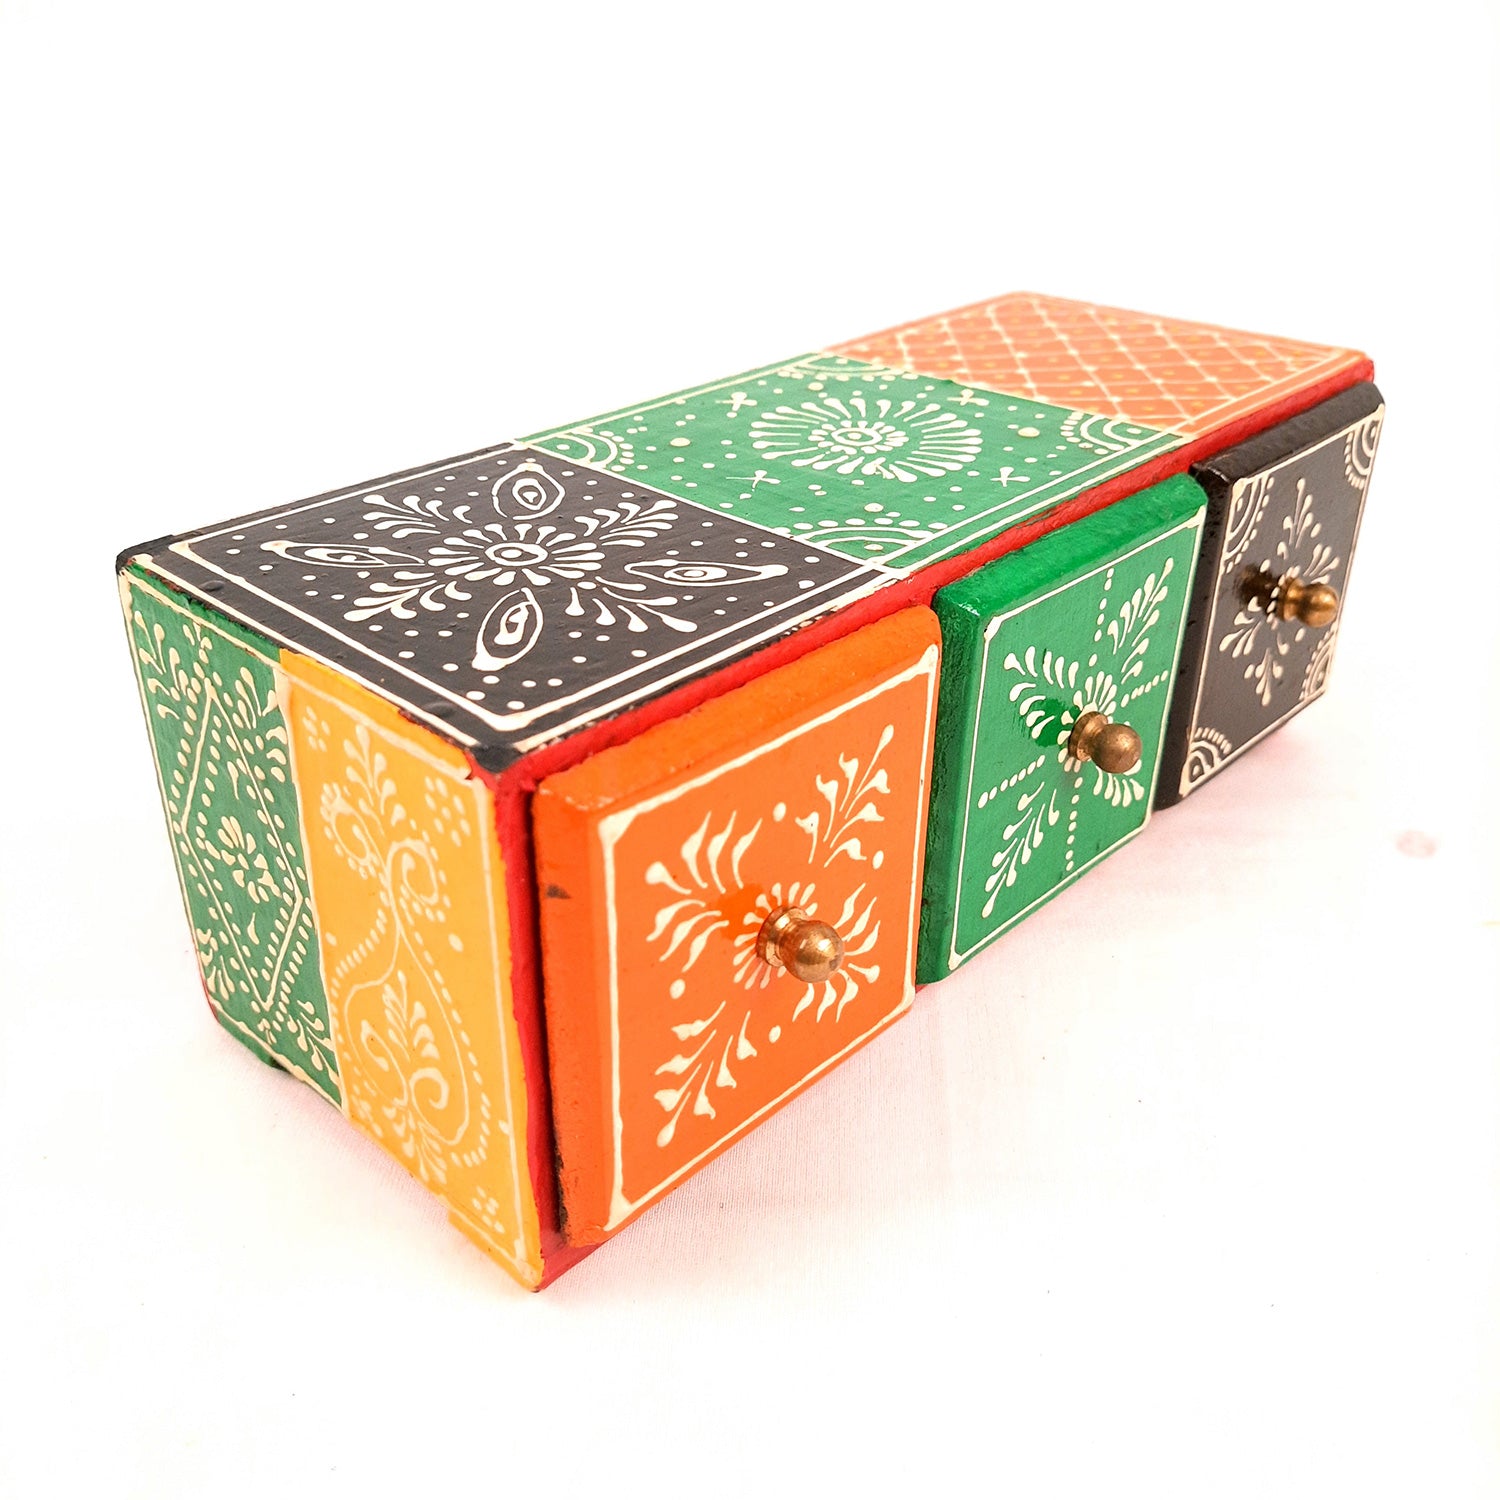 Jewellery Box | Decorative Wooden Jewelry Box - For Earring, Necklace & Gifts - 4 Inch - Apkamart